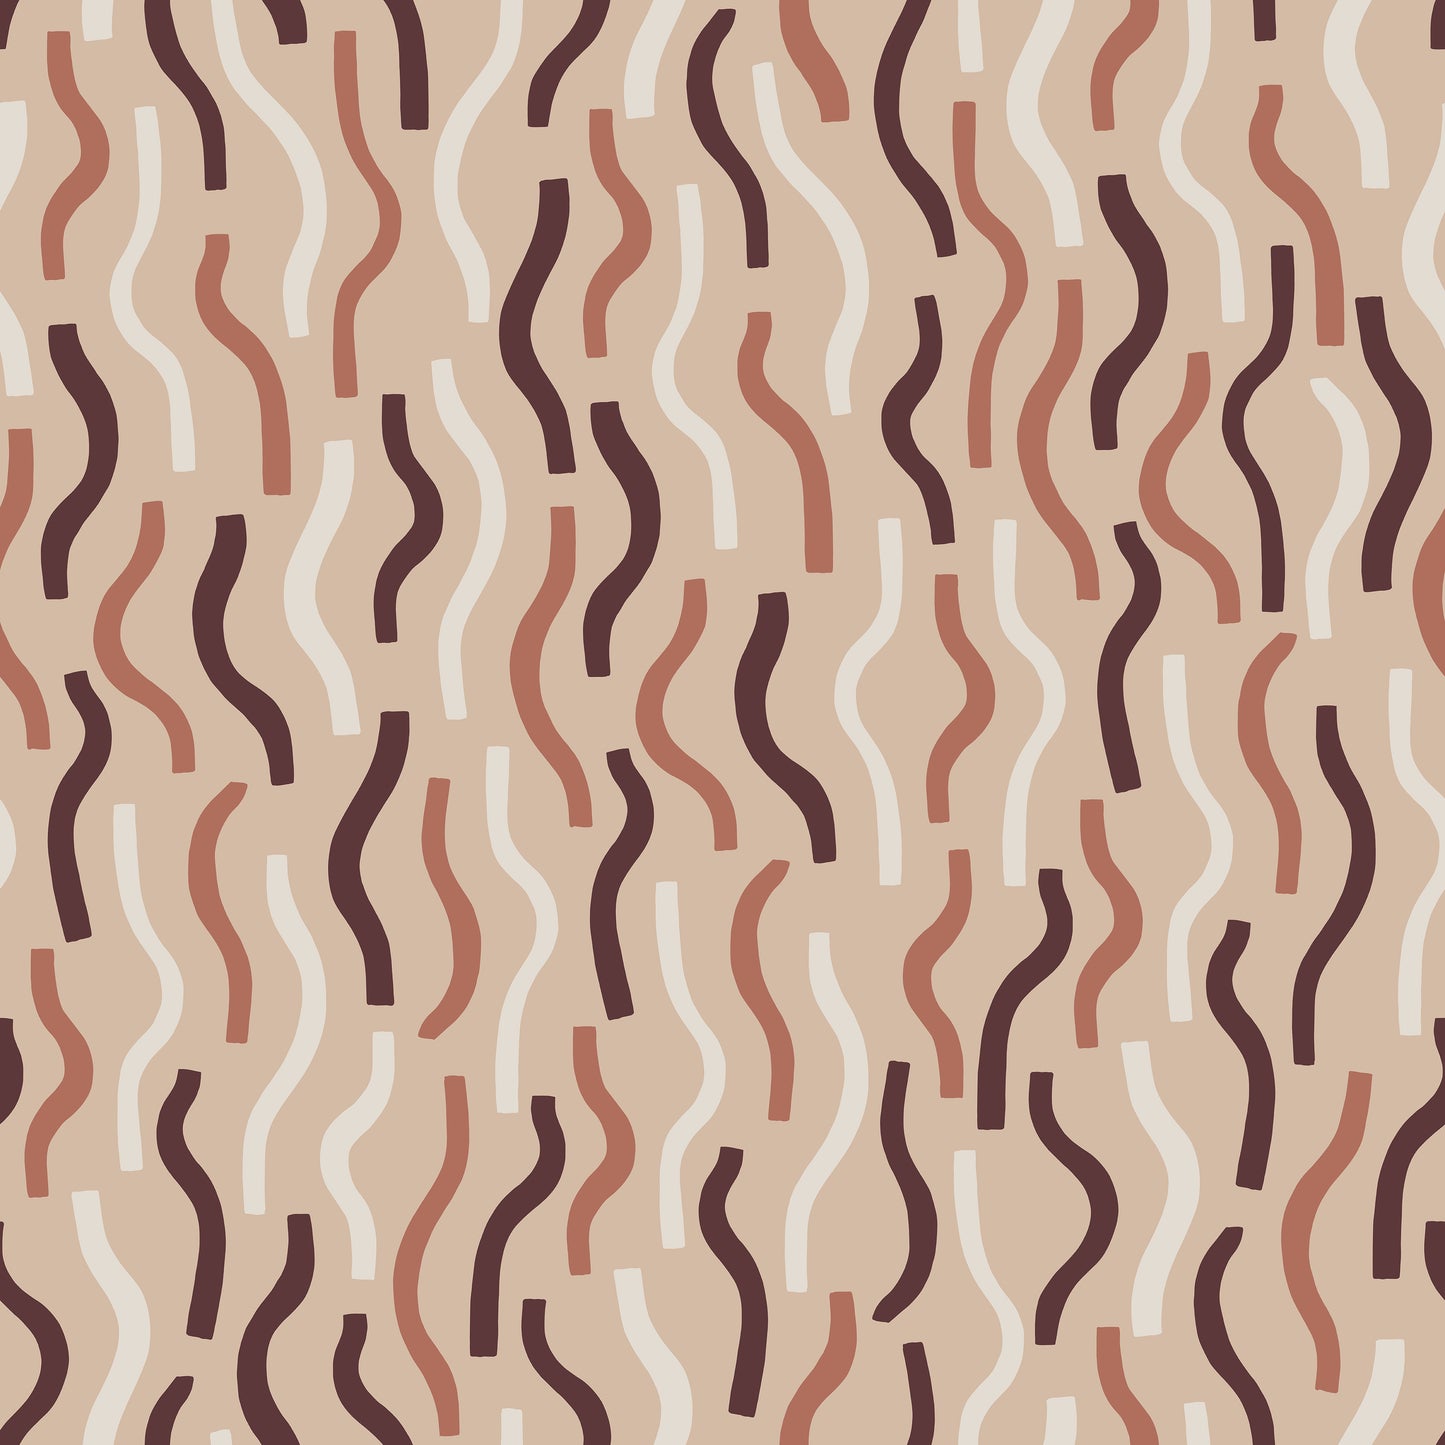 Brown Beige Wiggly Dashes Self Adhesive Vinyl